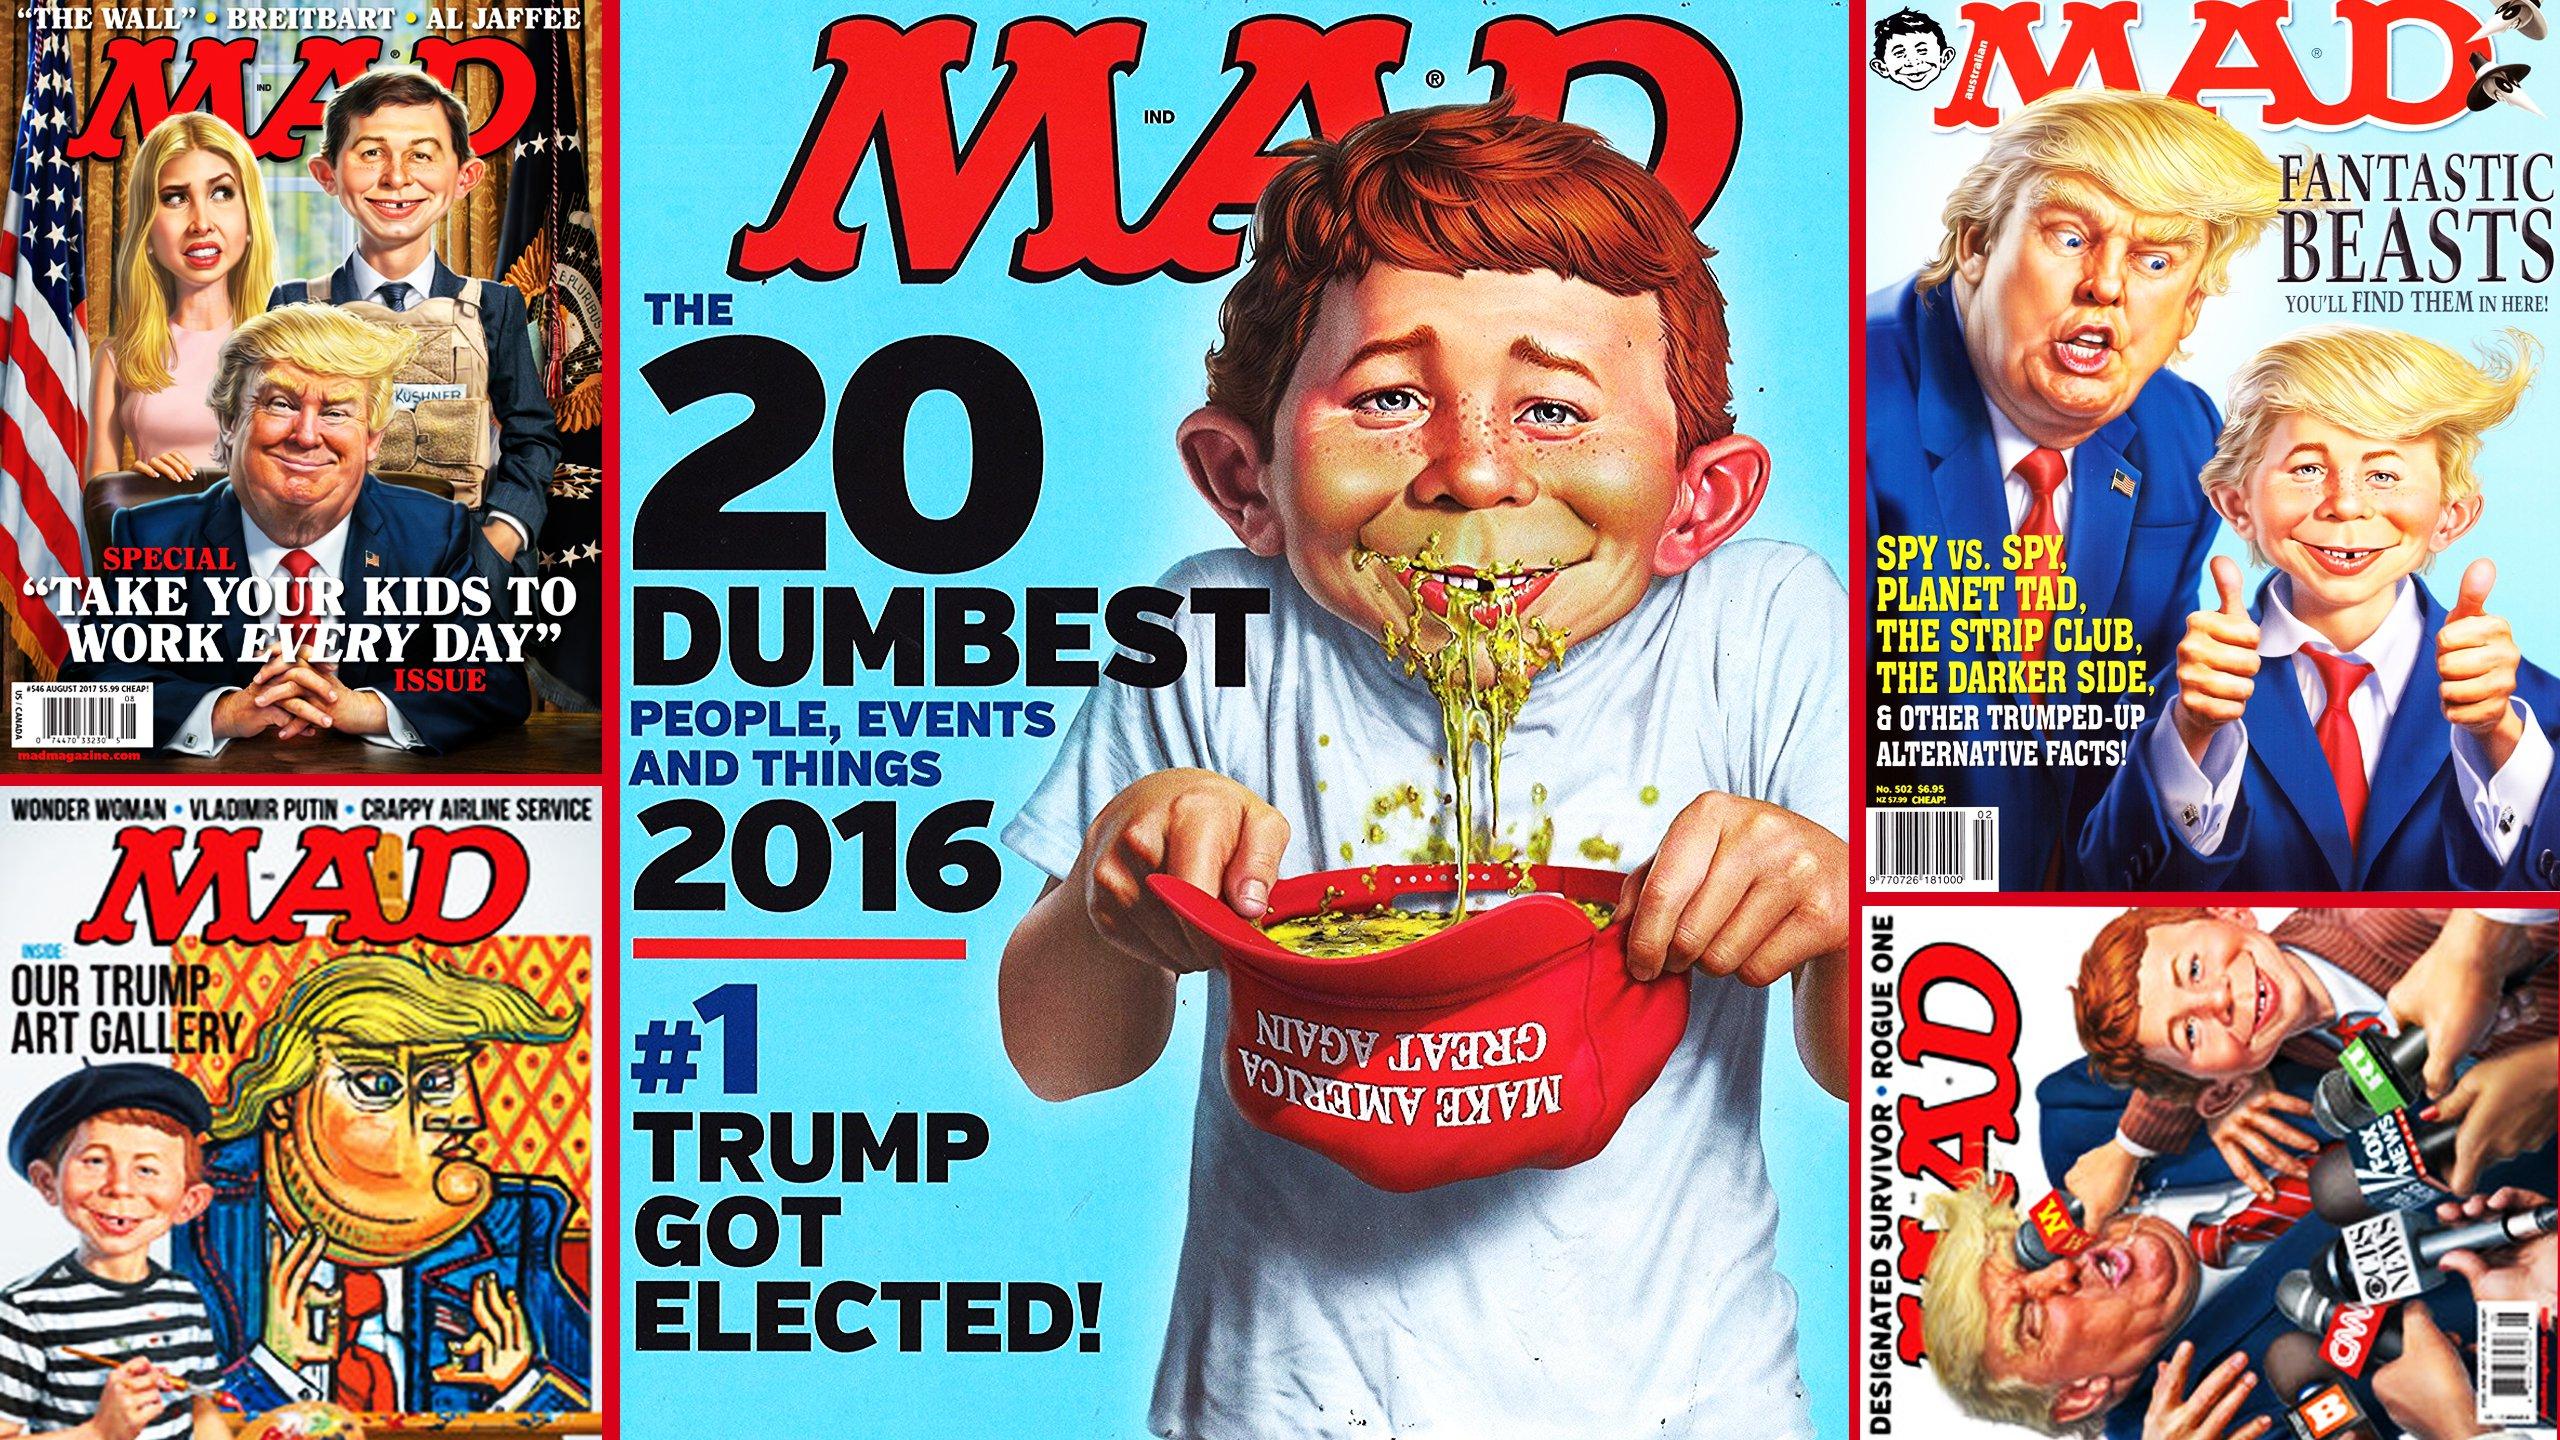 MAD Magazine Taught Us to Laugh but Now We Laugh